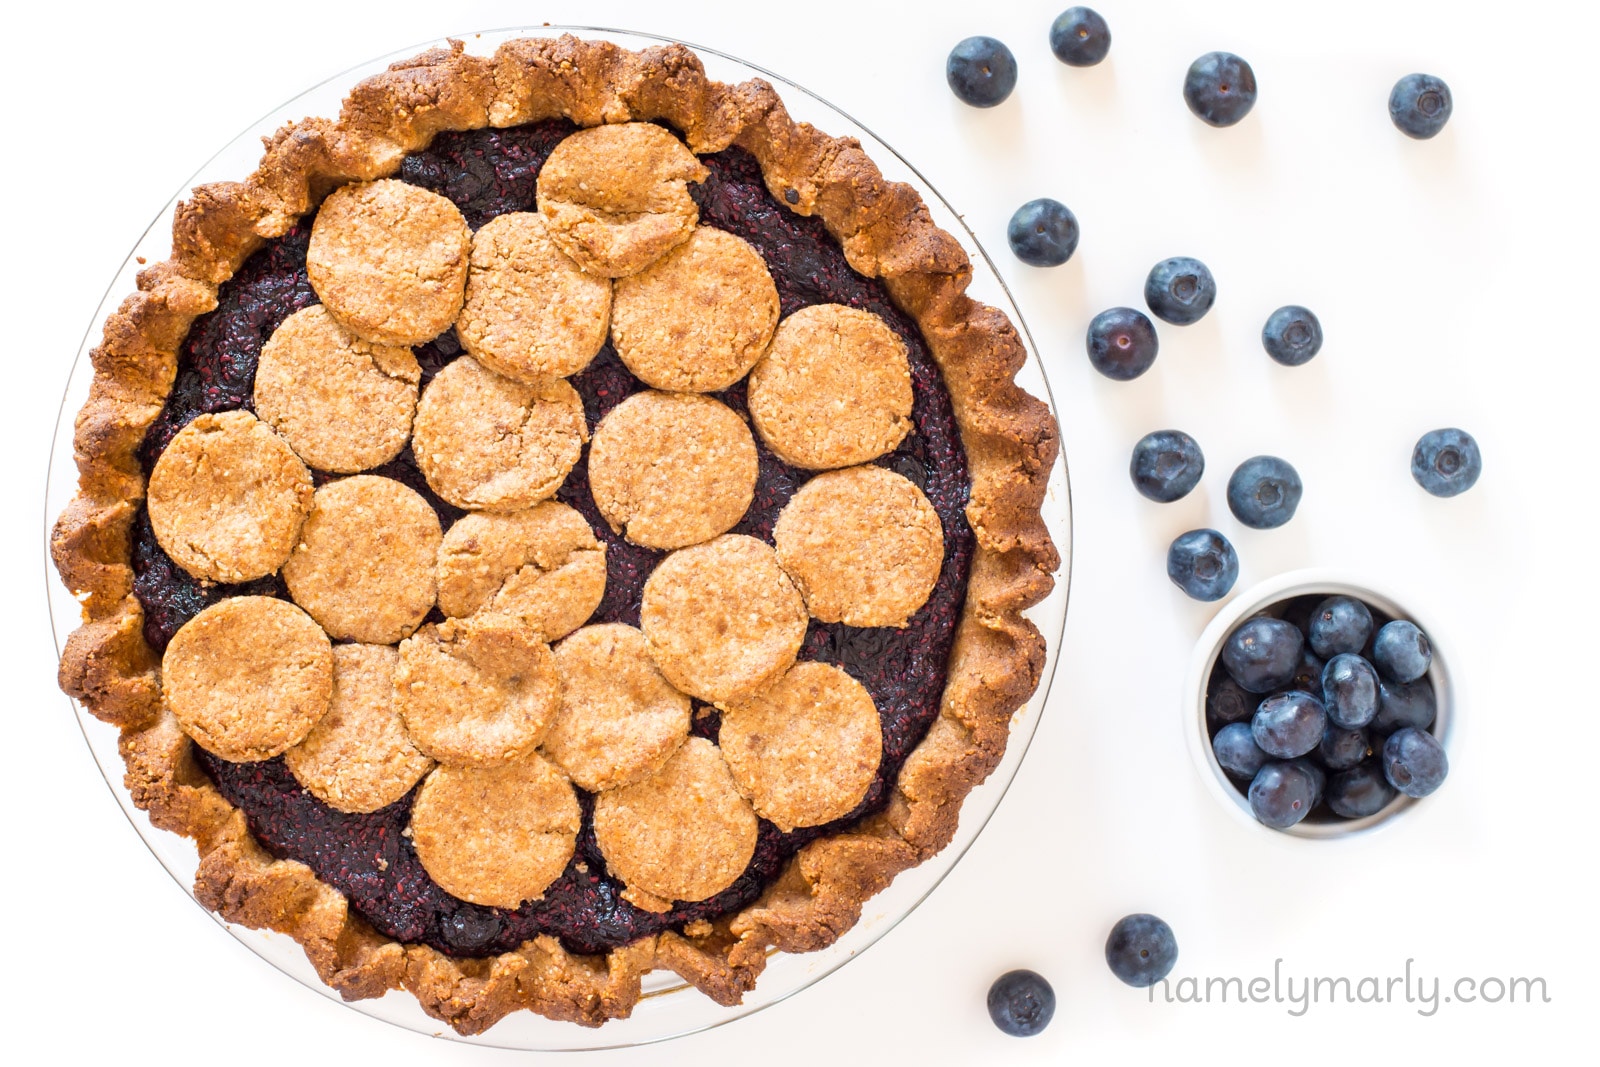 An overhead view of a berry pie with blueberries scattered around on a marble surface